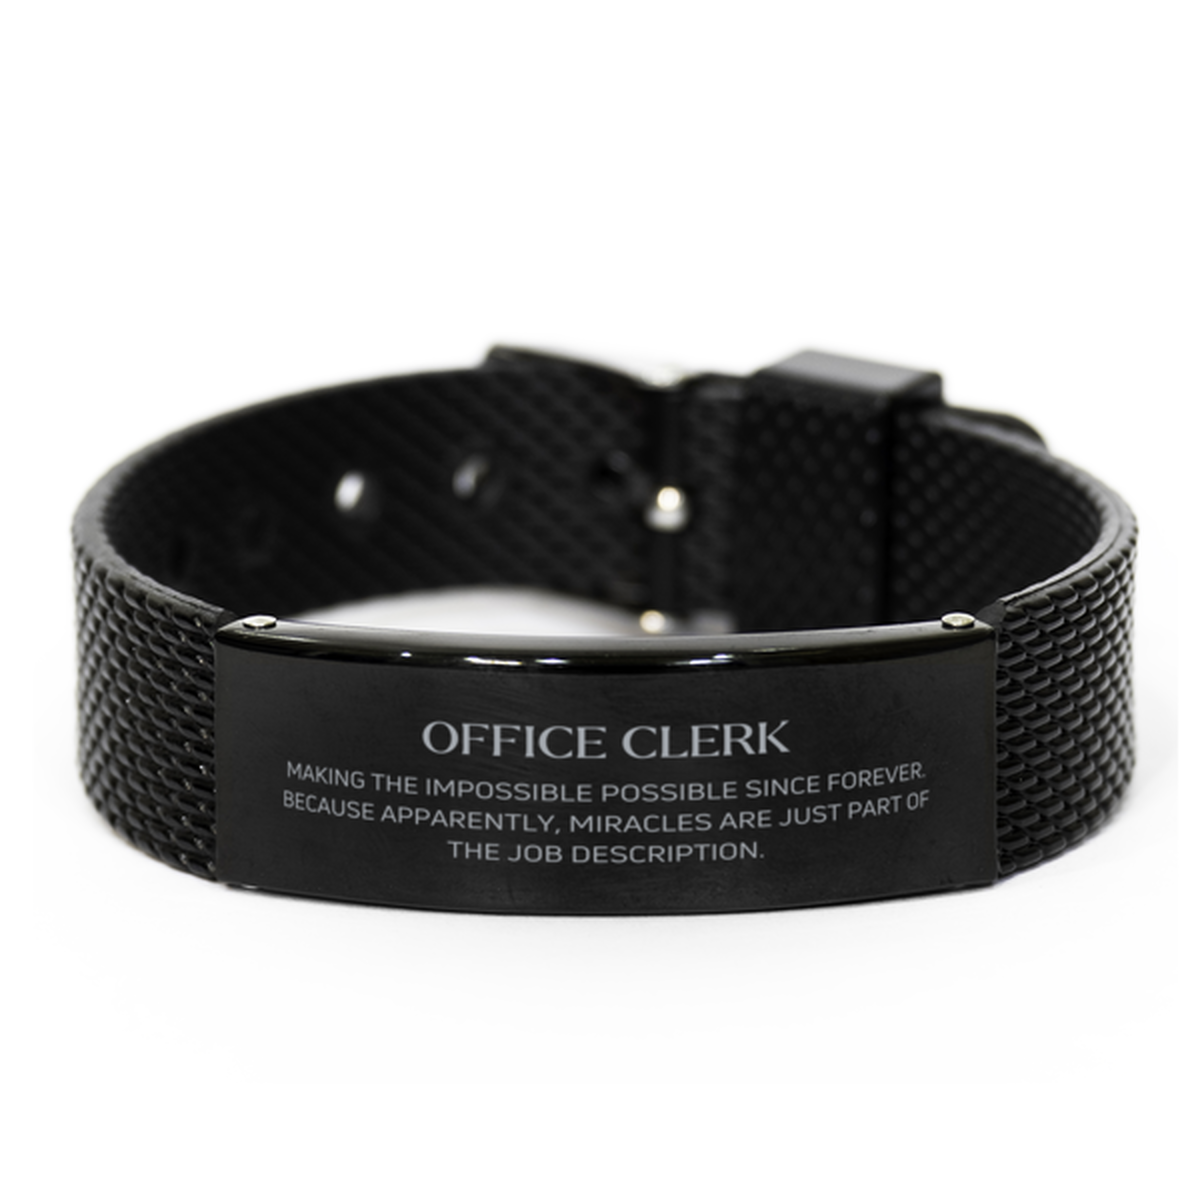 Funny Office Clerk Gifts, Miracles are just part of the job description, Inspirational Birthday Black Shark Mesh Bracelet For Office Clerk, Men, Women, Coworkers, Friends, Boss